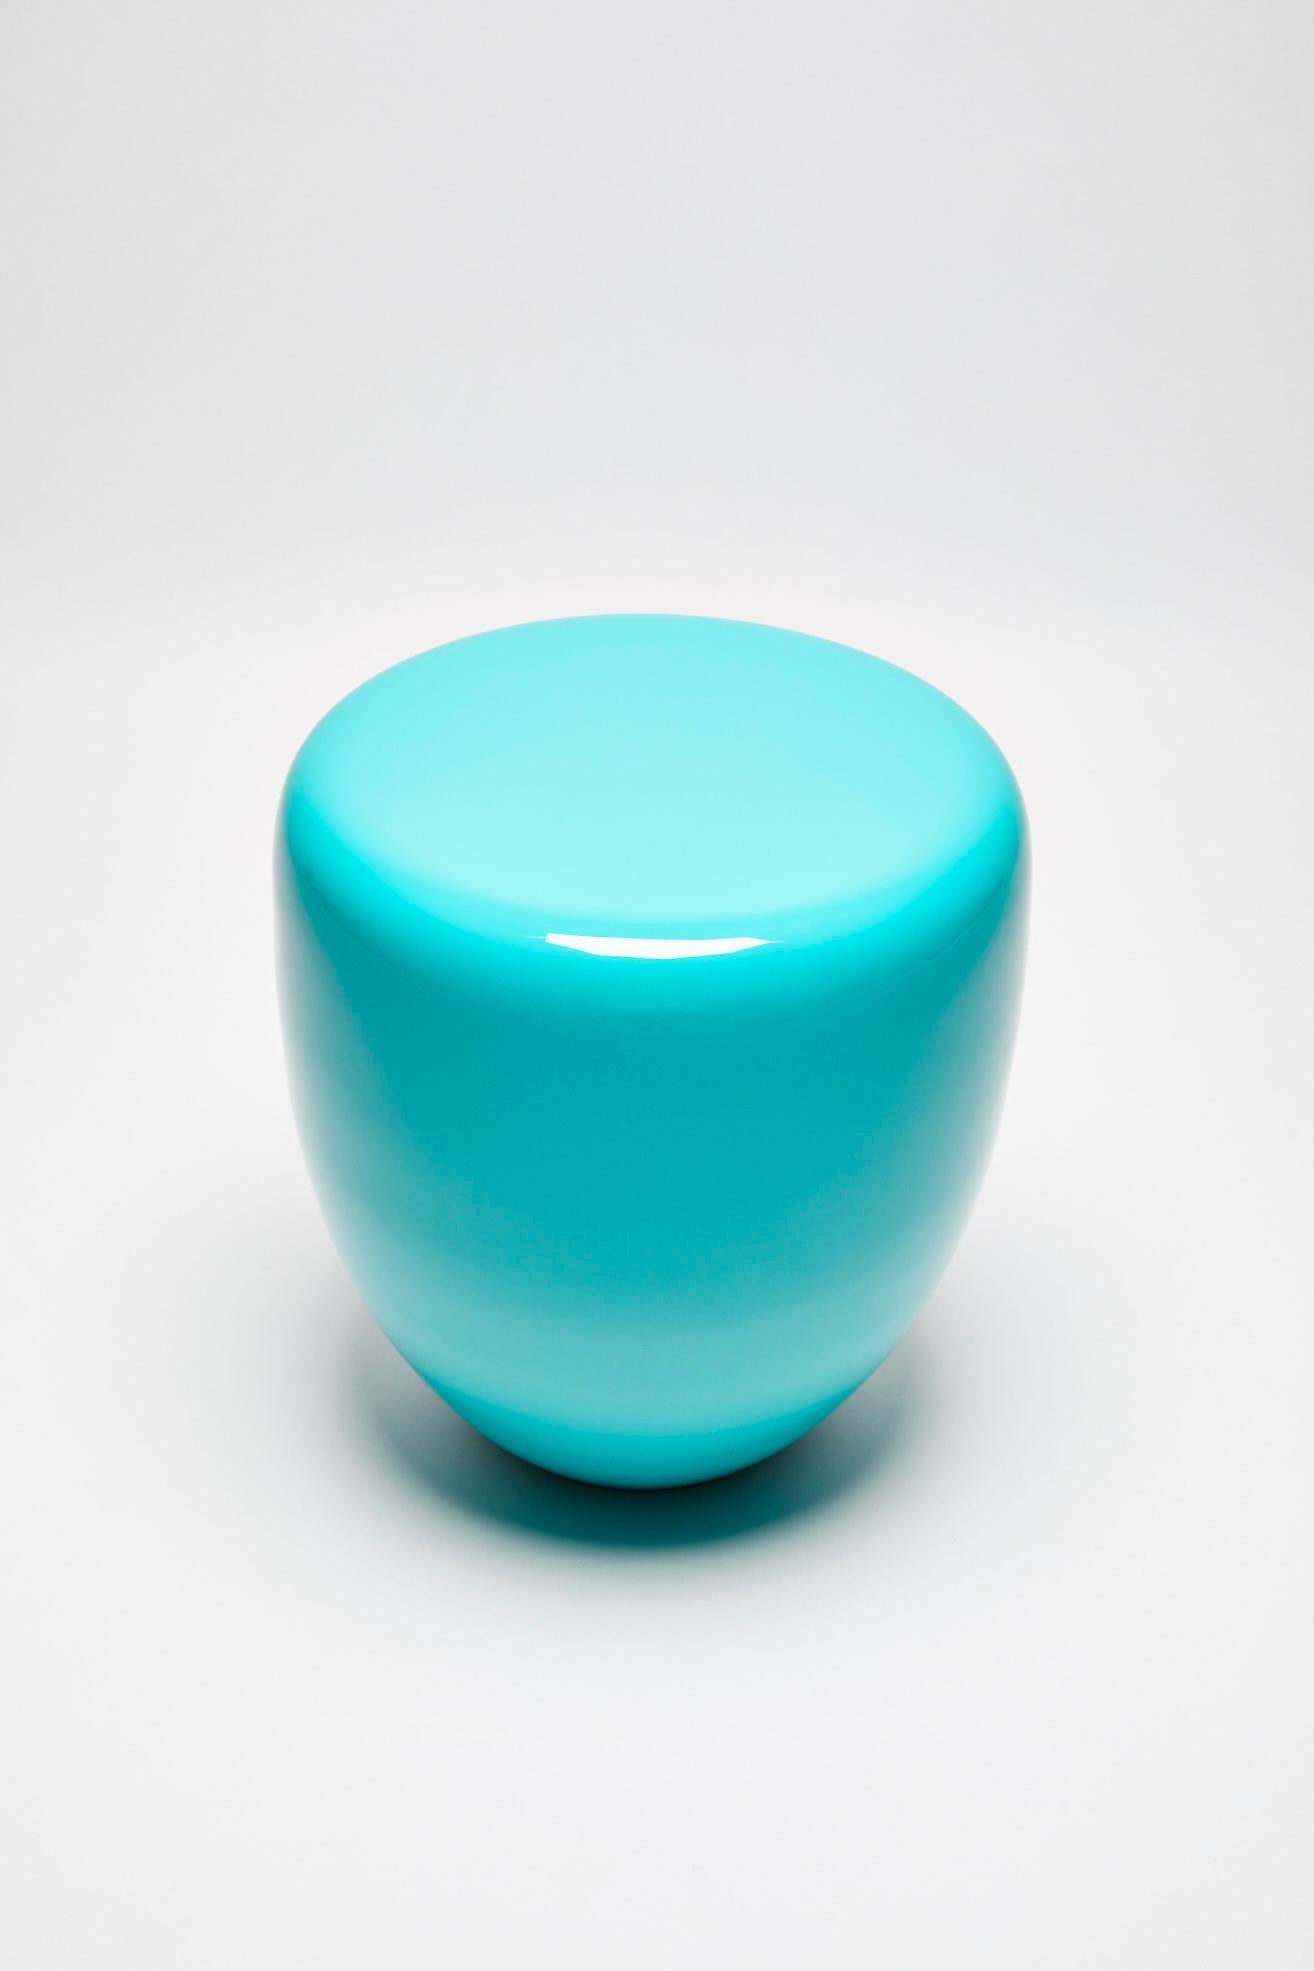 Minimalist Side Table, Bohemian Blue DOT by Reda Amalou Design, 2017-Glossy or mate lacquer For Sale